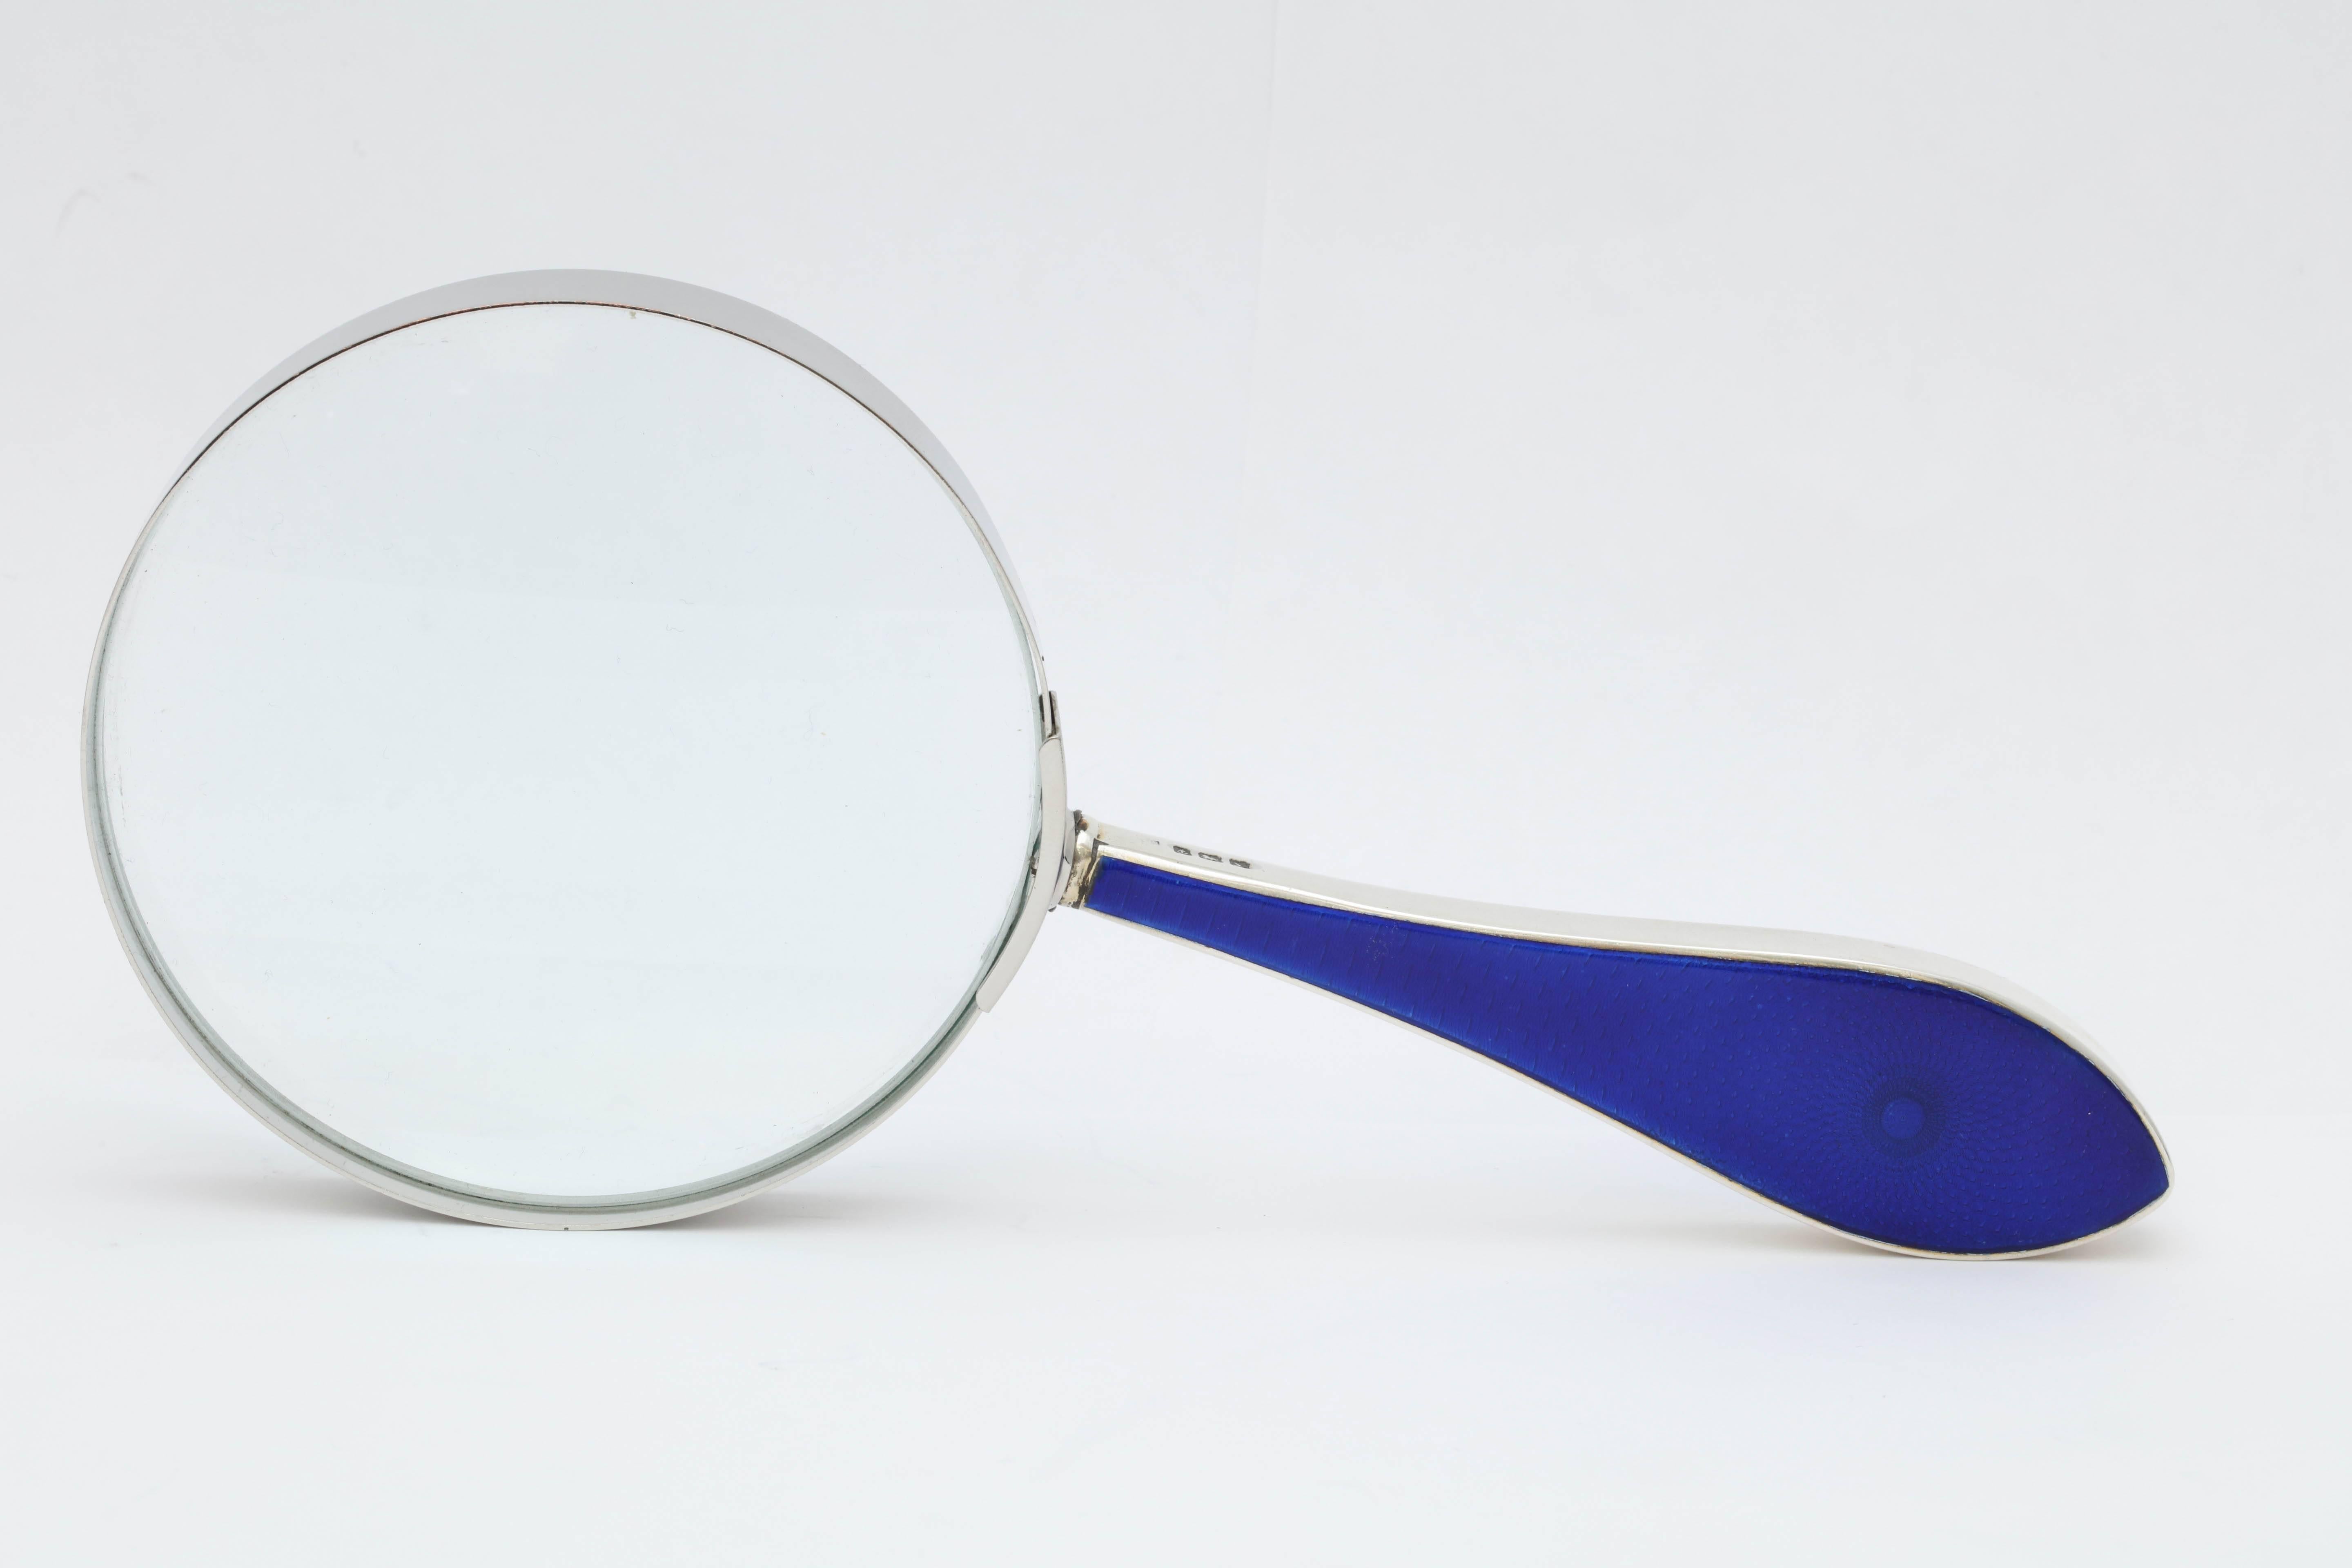 Large, Art Deco, sterling silver-mounted deep cobalt blue guilloche enamel magnifying glass, Birmingham, England, 1923. Measures: 8 1/2 inches long x 3 3/4 diameter of actual magnifying glass itself, which has a metal rim. Sterling silver has deep